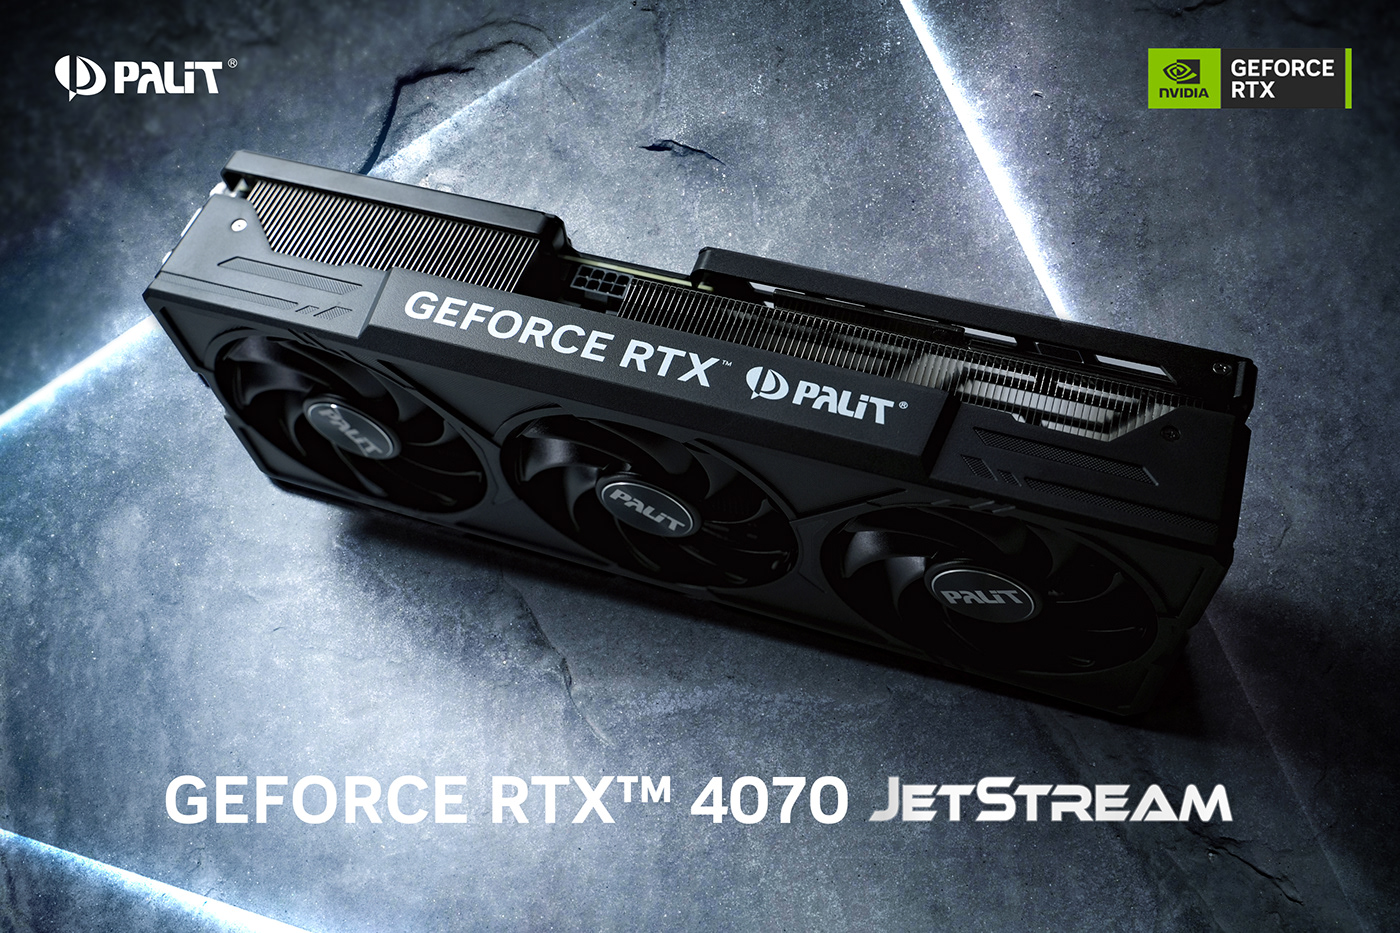 GeForce graphics card nvidia rtx Gaming PALIT